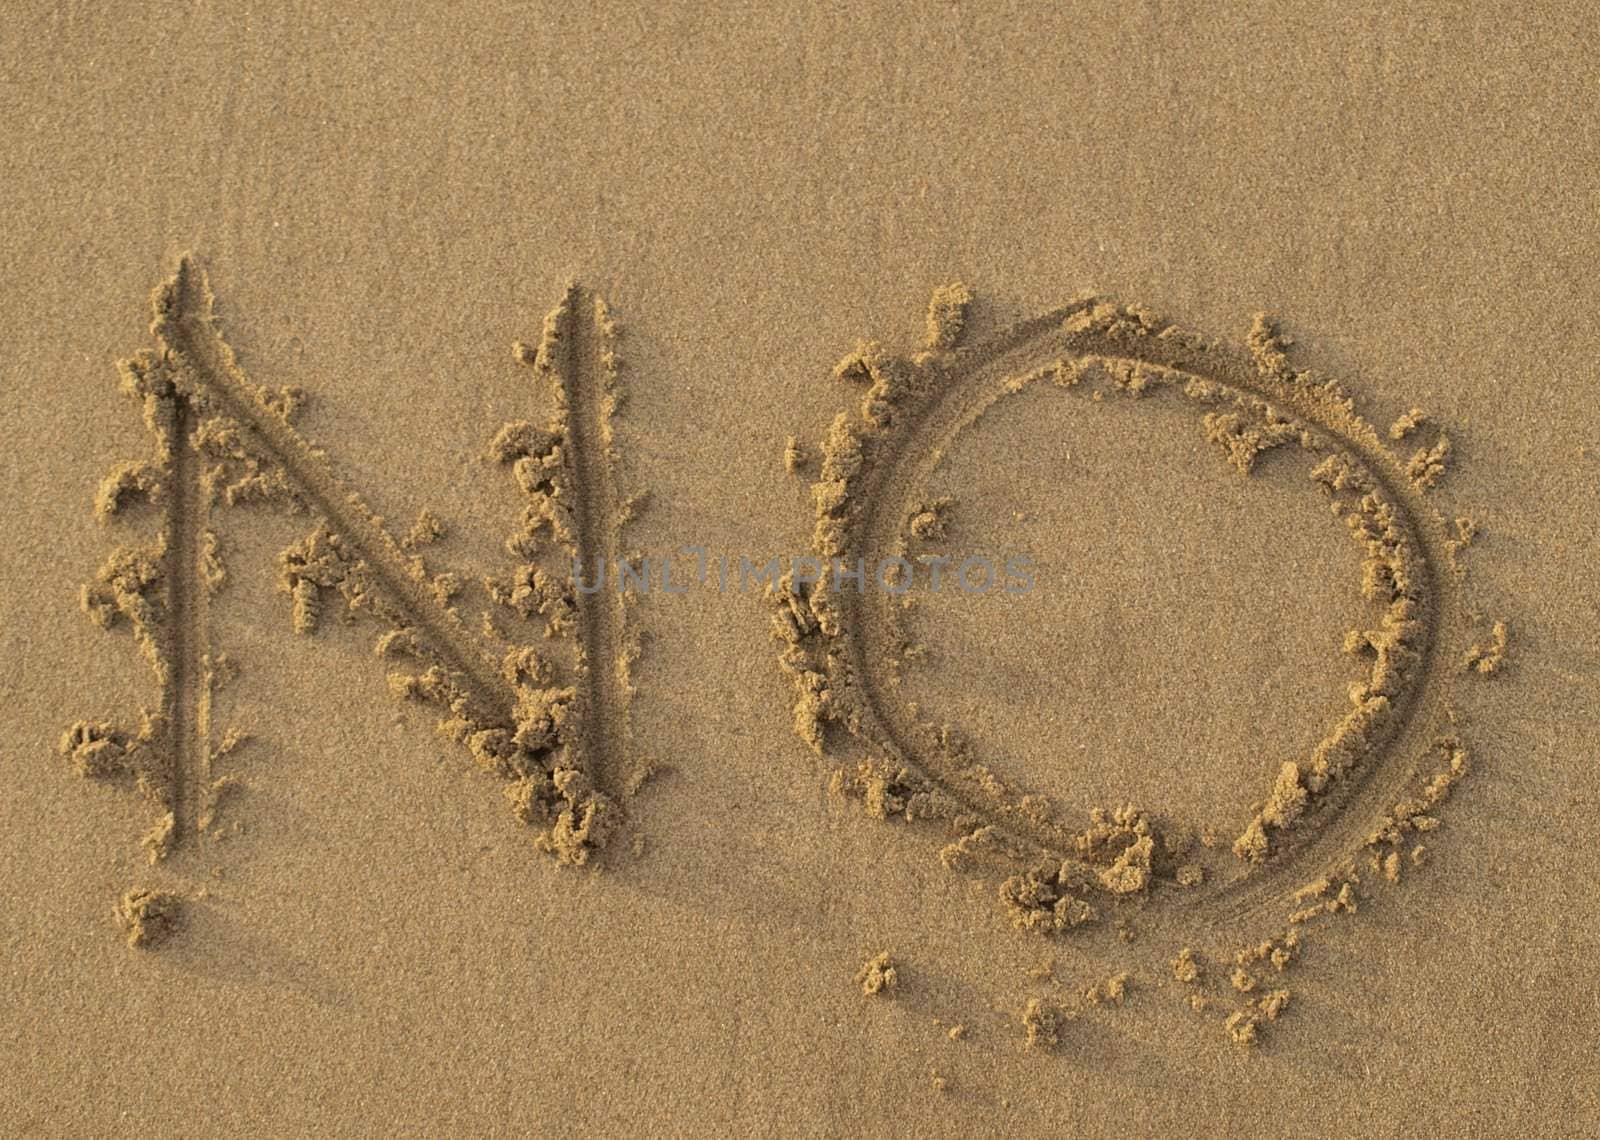 letters N and O written in the sand